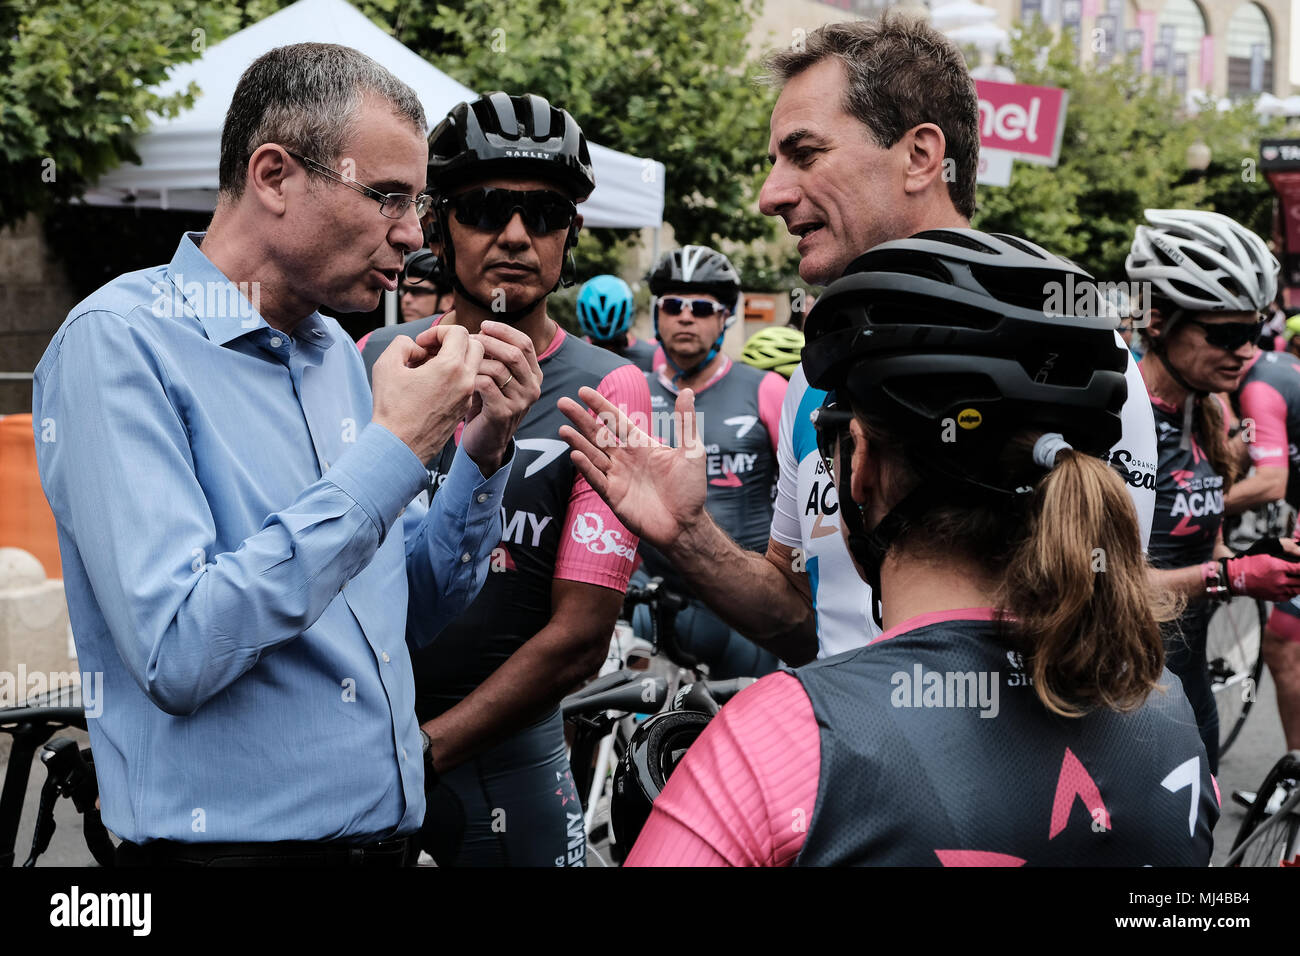 Jerusalem, Israel. 4th May, 2018. YARIV LEVIN (L), Minister of Tourism, meets with Israel Cycling Academy riders, taking part in Giro d'Italia, the Corsa Rosa, for the first time. The 101st edition of Giro d'Italia begins today in Jerusalem, history being made with the first ever Grand Tour start outside of Europe. Competing riders set out for the 9.7Km Jerusalem Individual Time Trial Stage 1. Stock Photo